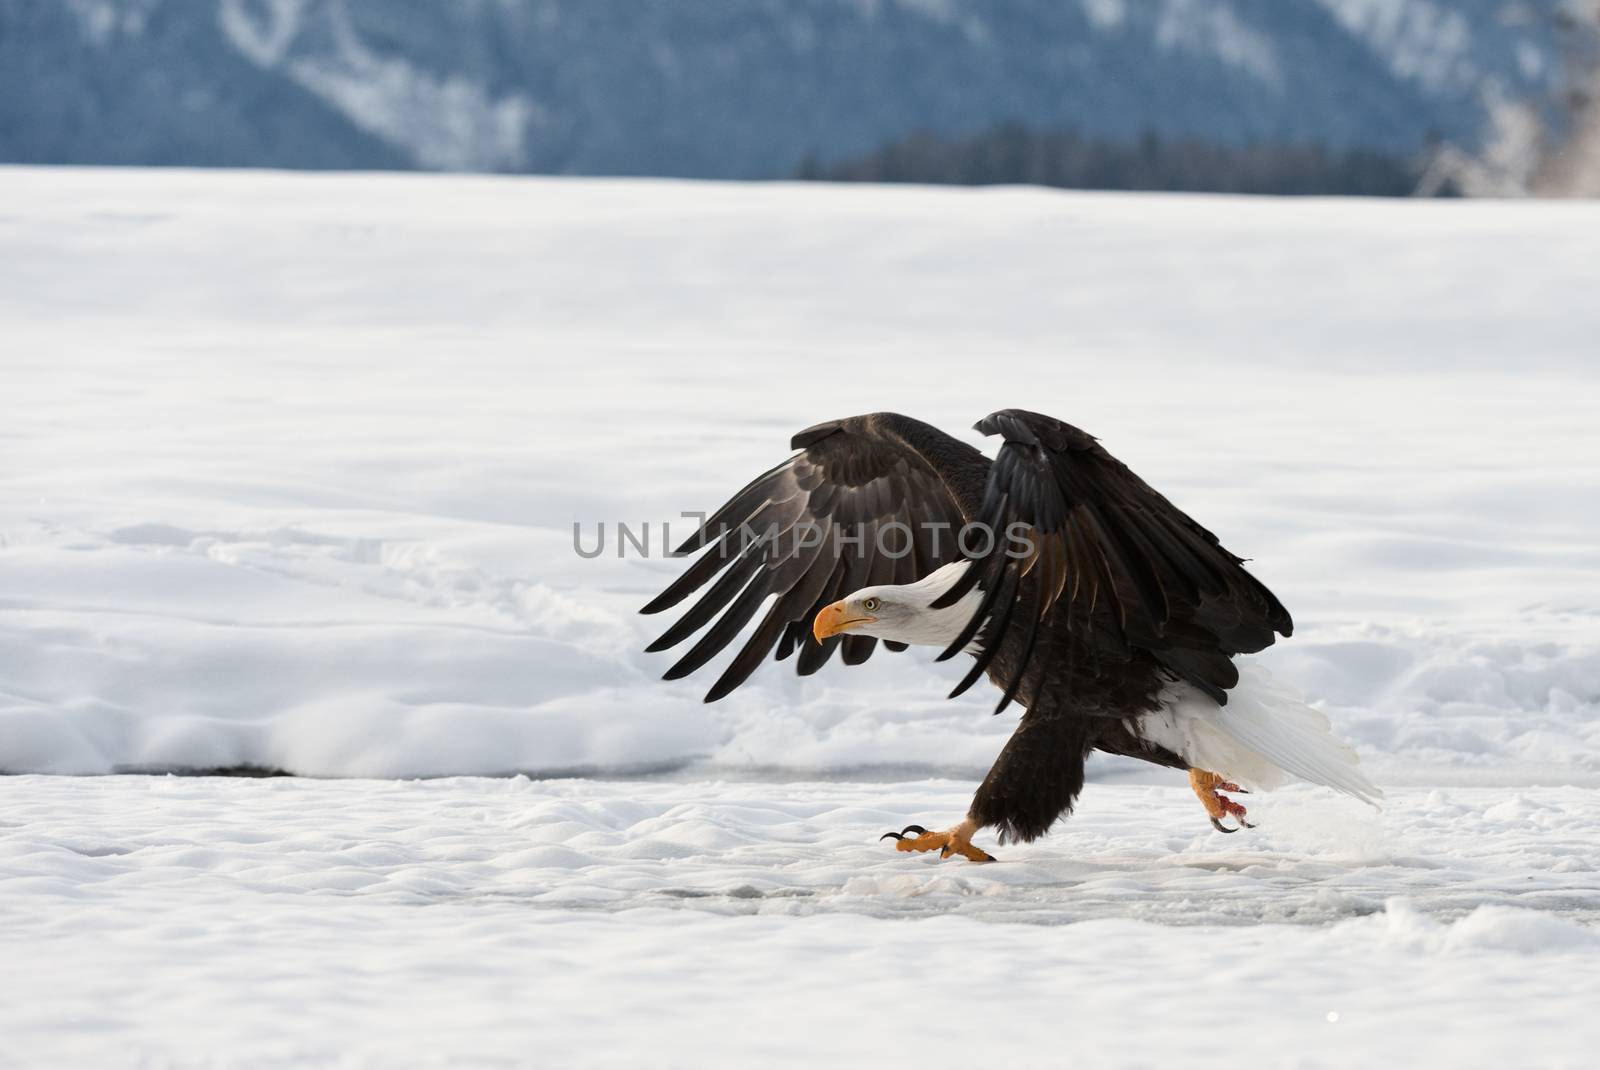 The Bald eagle lands on the snow-covered ground, having stretched wings